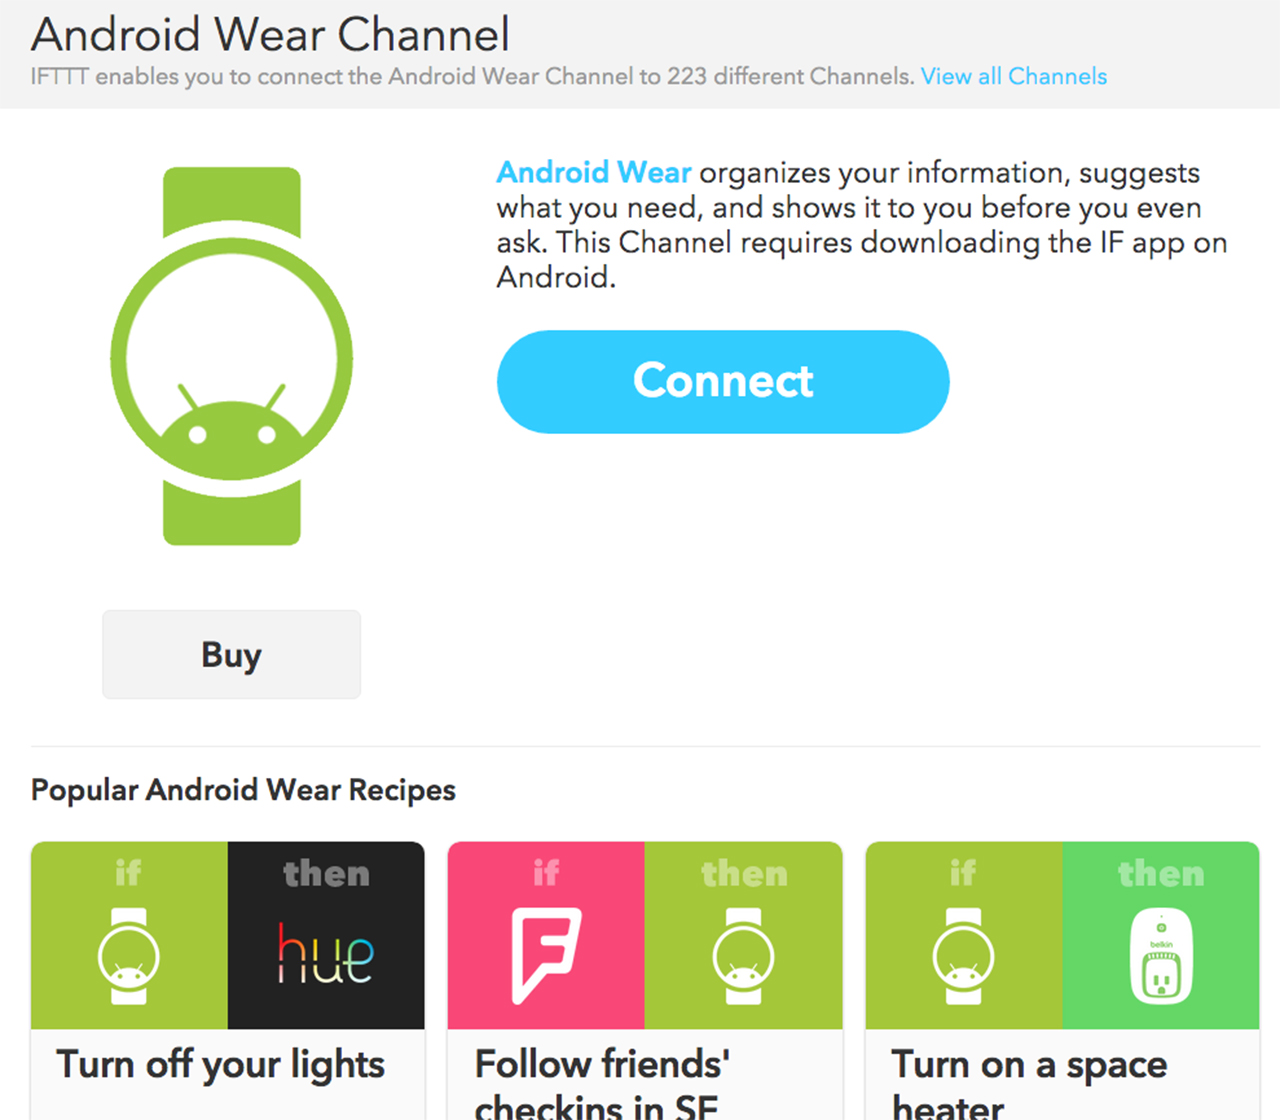 Android Wear IFFT